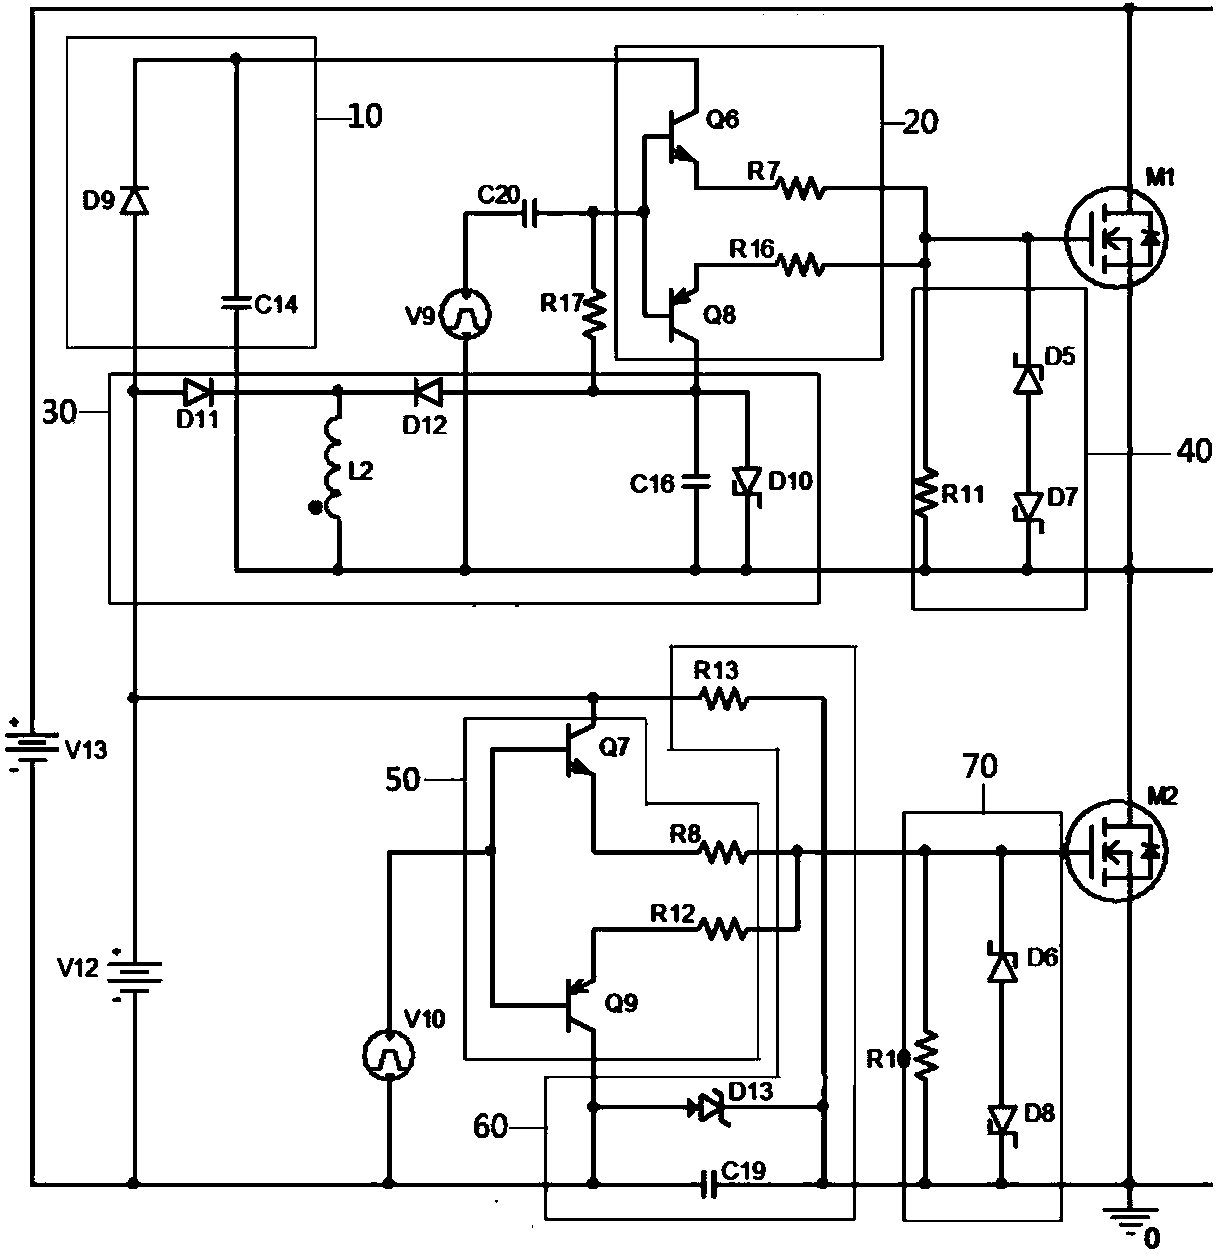 Bootstrap power-supply MOSFET/IGBT (metal-oxide-semiconductor field effect transistor/insulated gate bipolar translator) driving circuit with high negative voltage